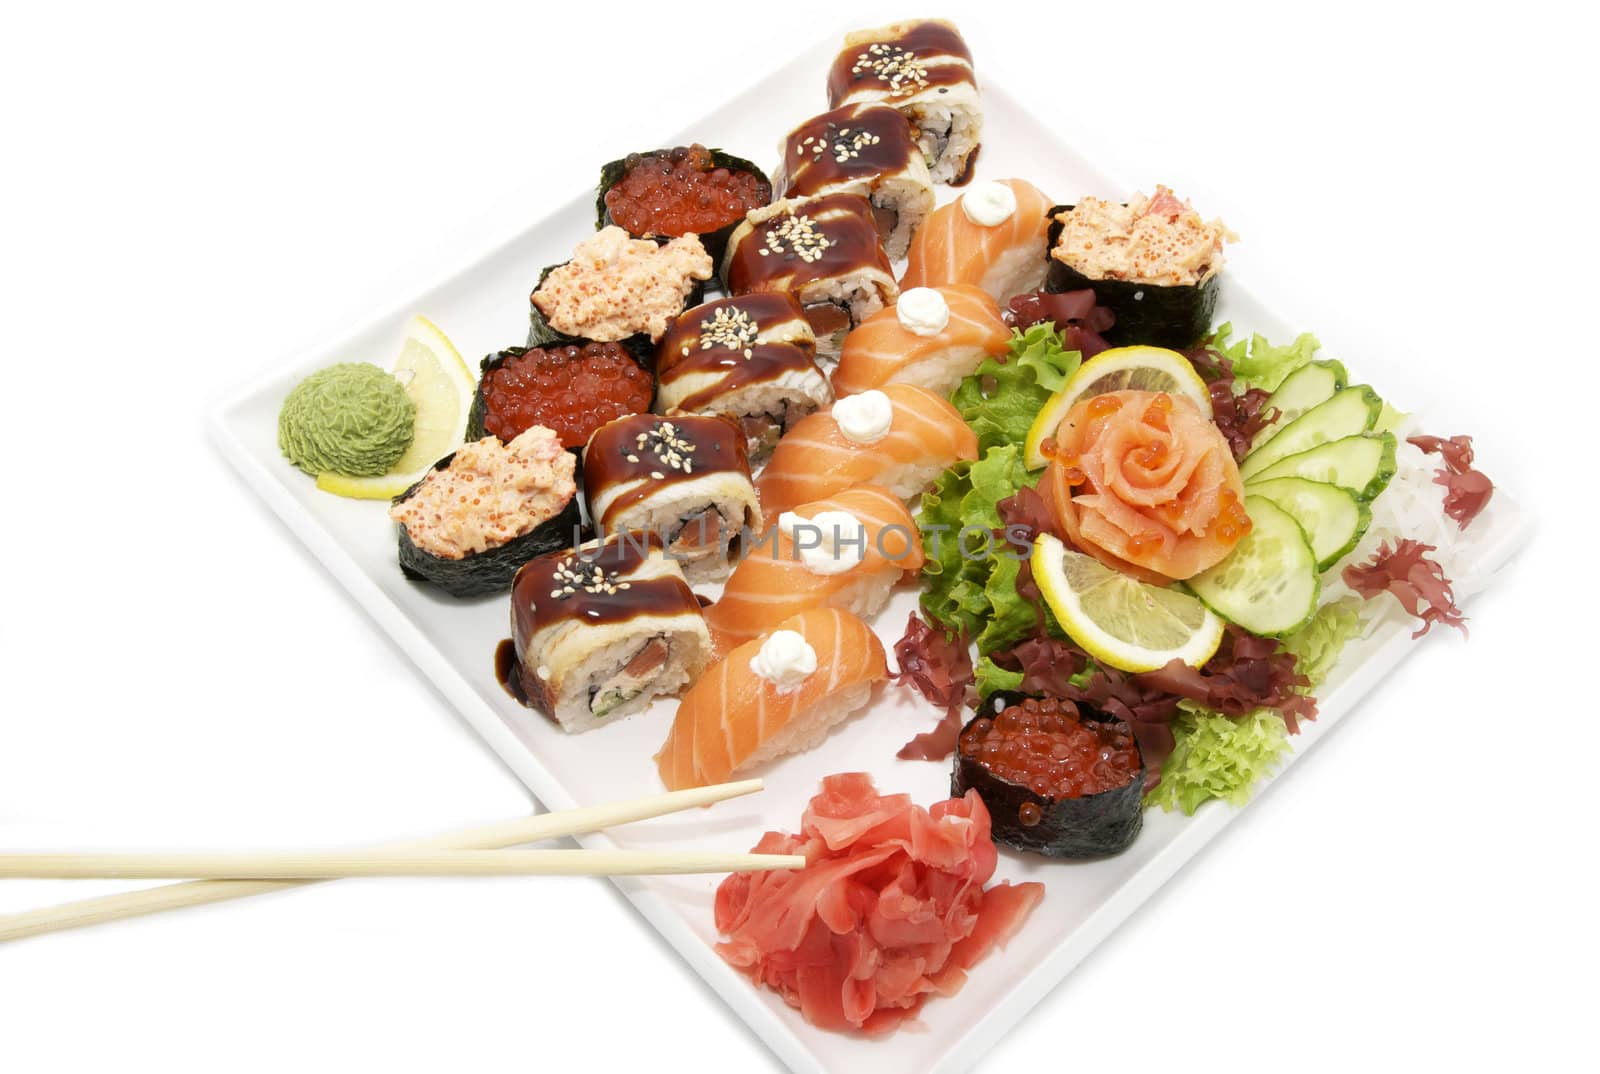 a plate of sushi and salad on a white background